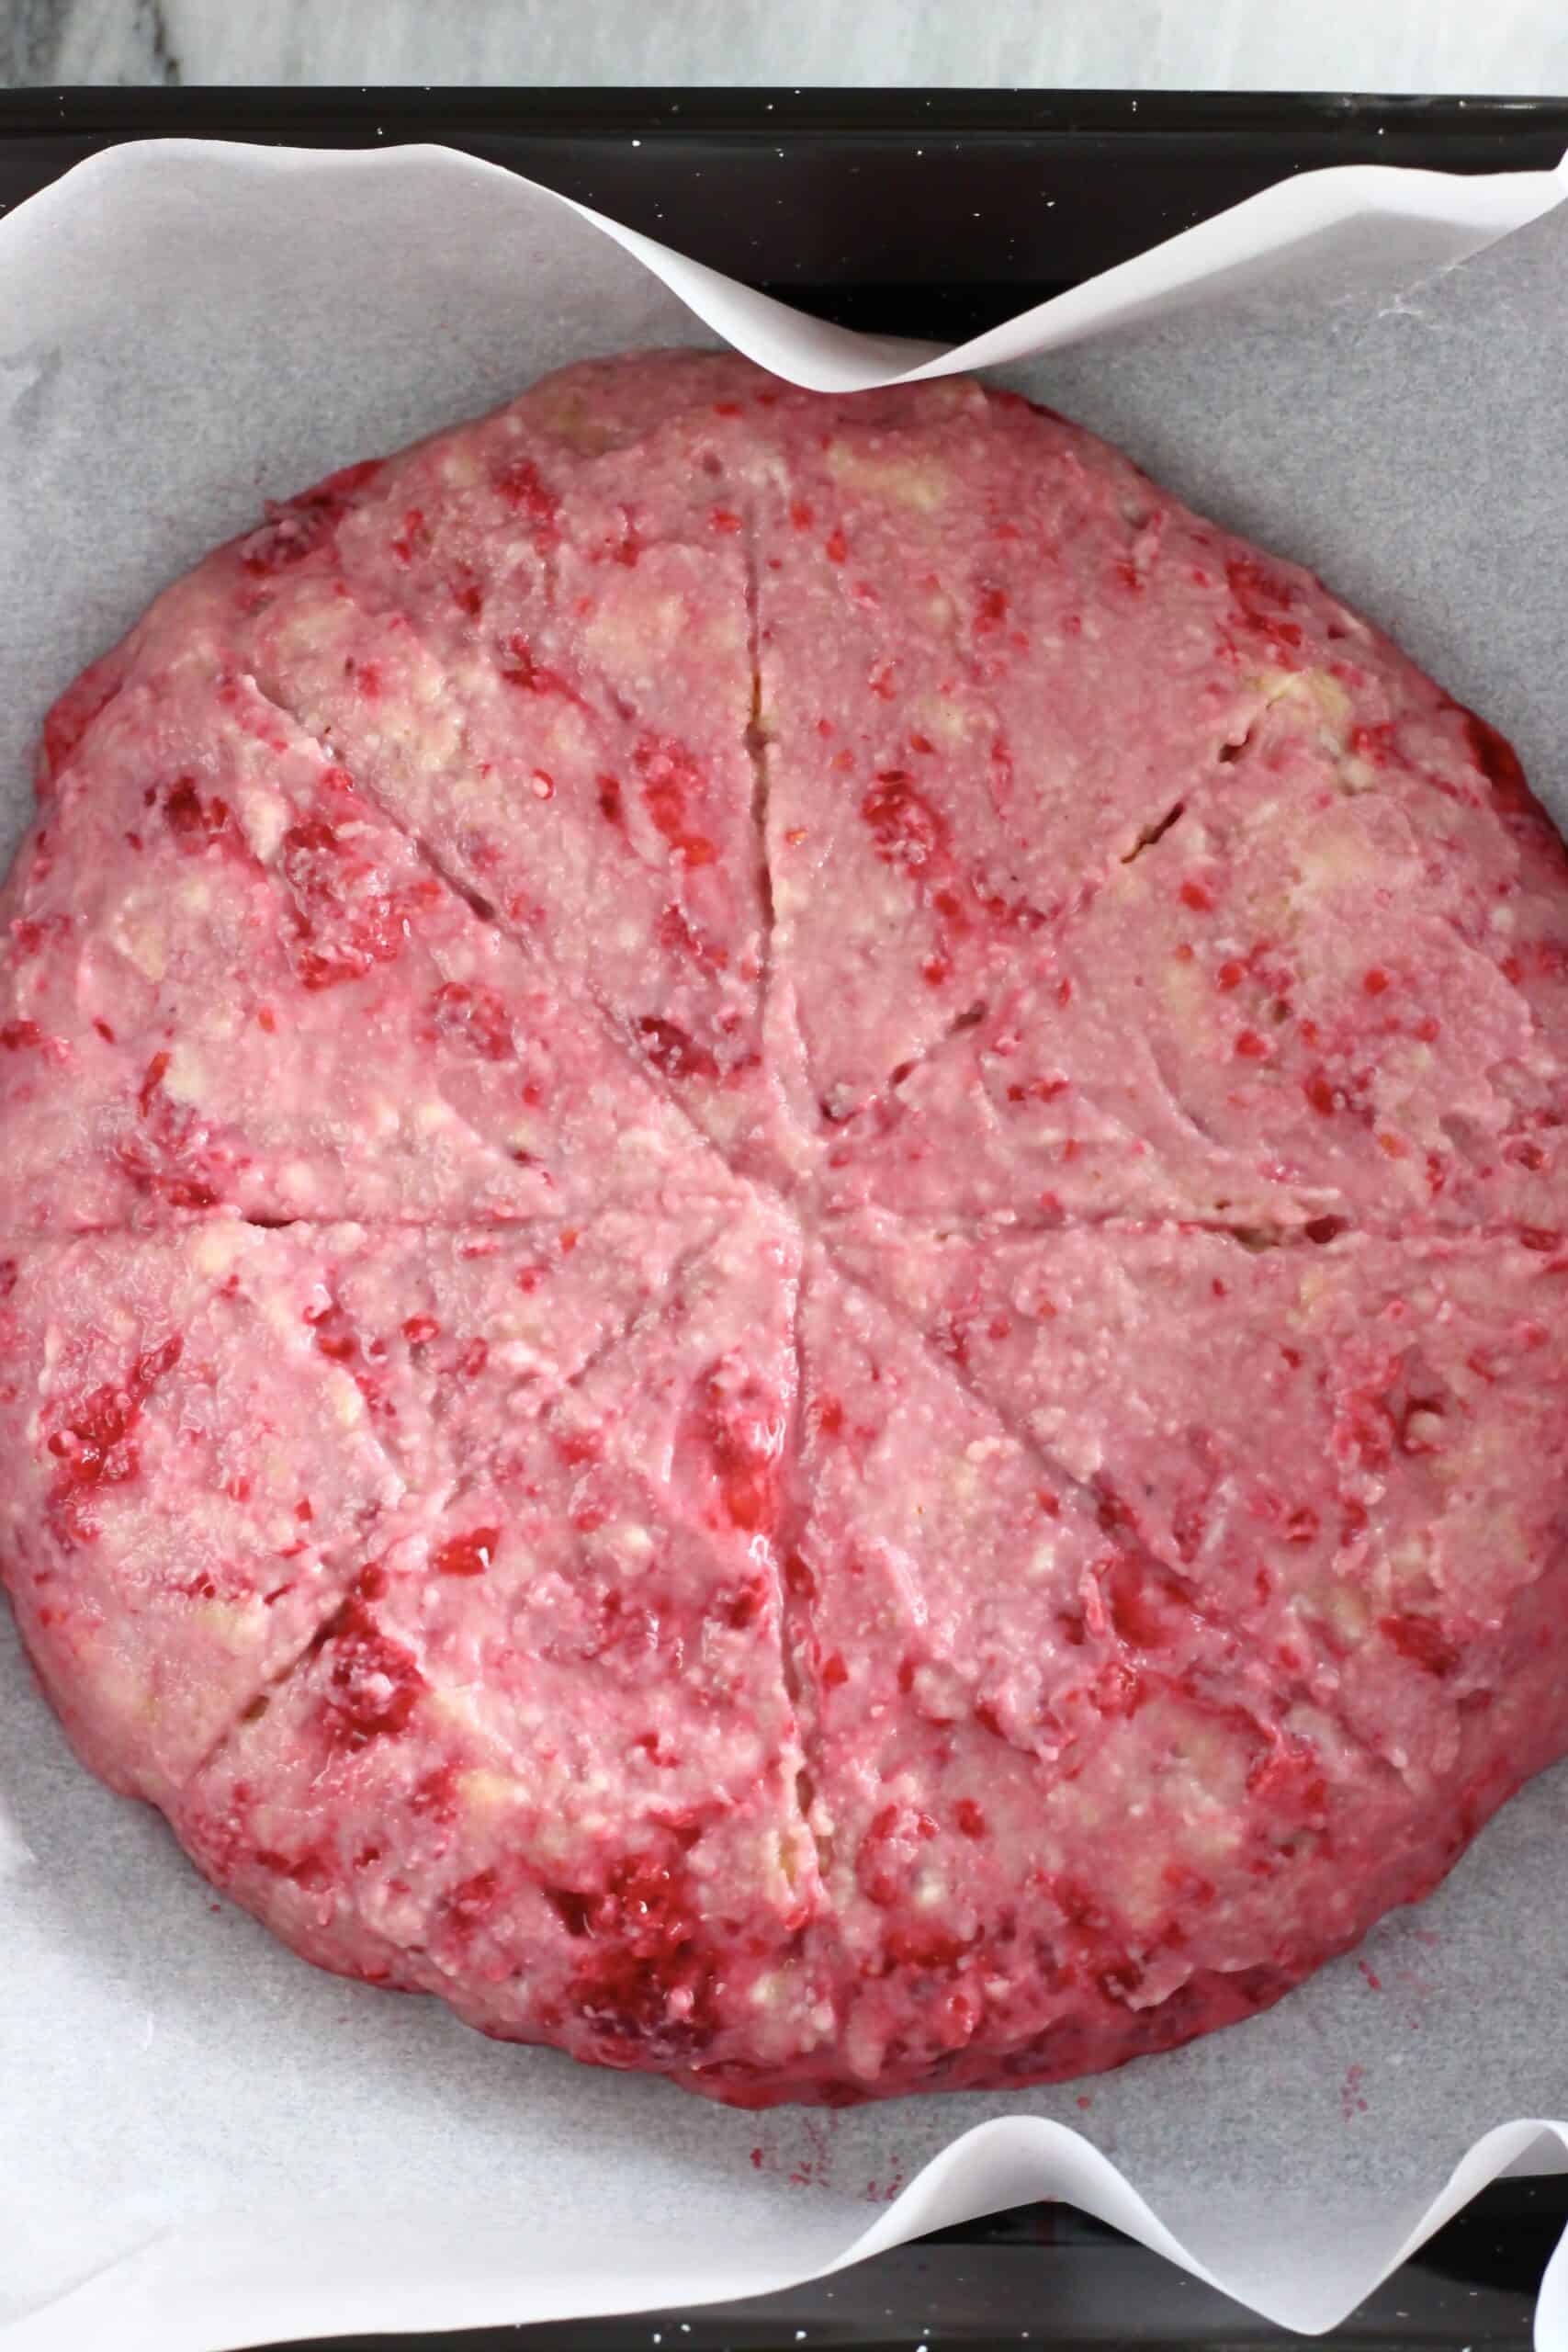 Raw gluten-free vegan raspberry scones batter in a round circle scored into 8 pieces on a baking tray lined with baking paper